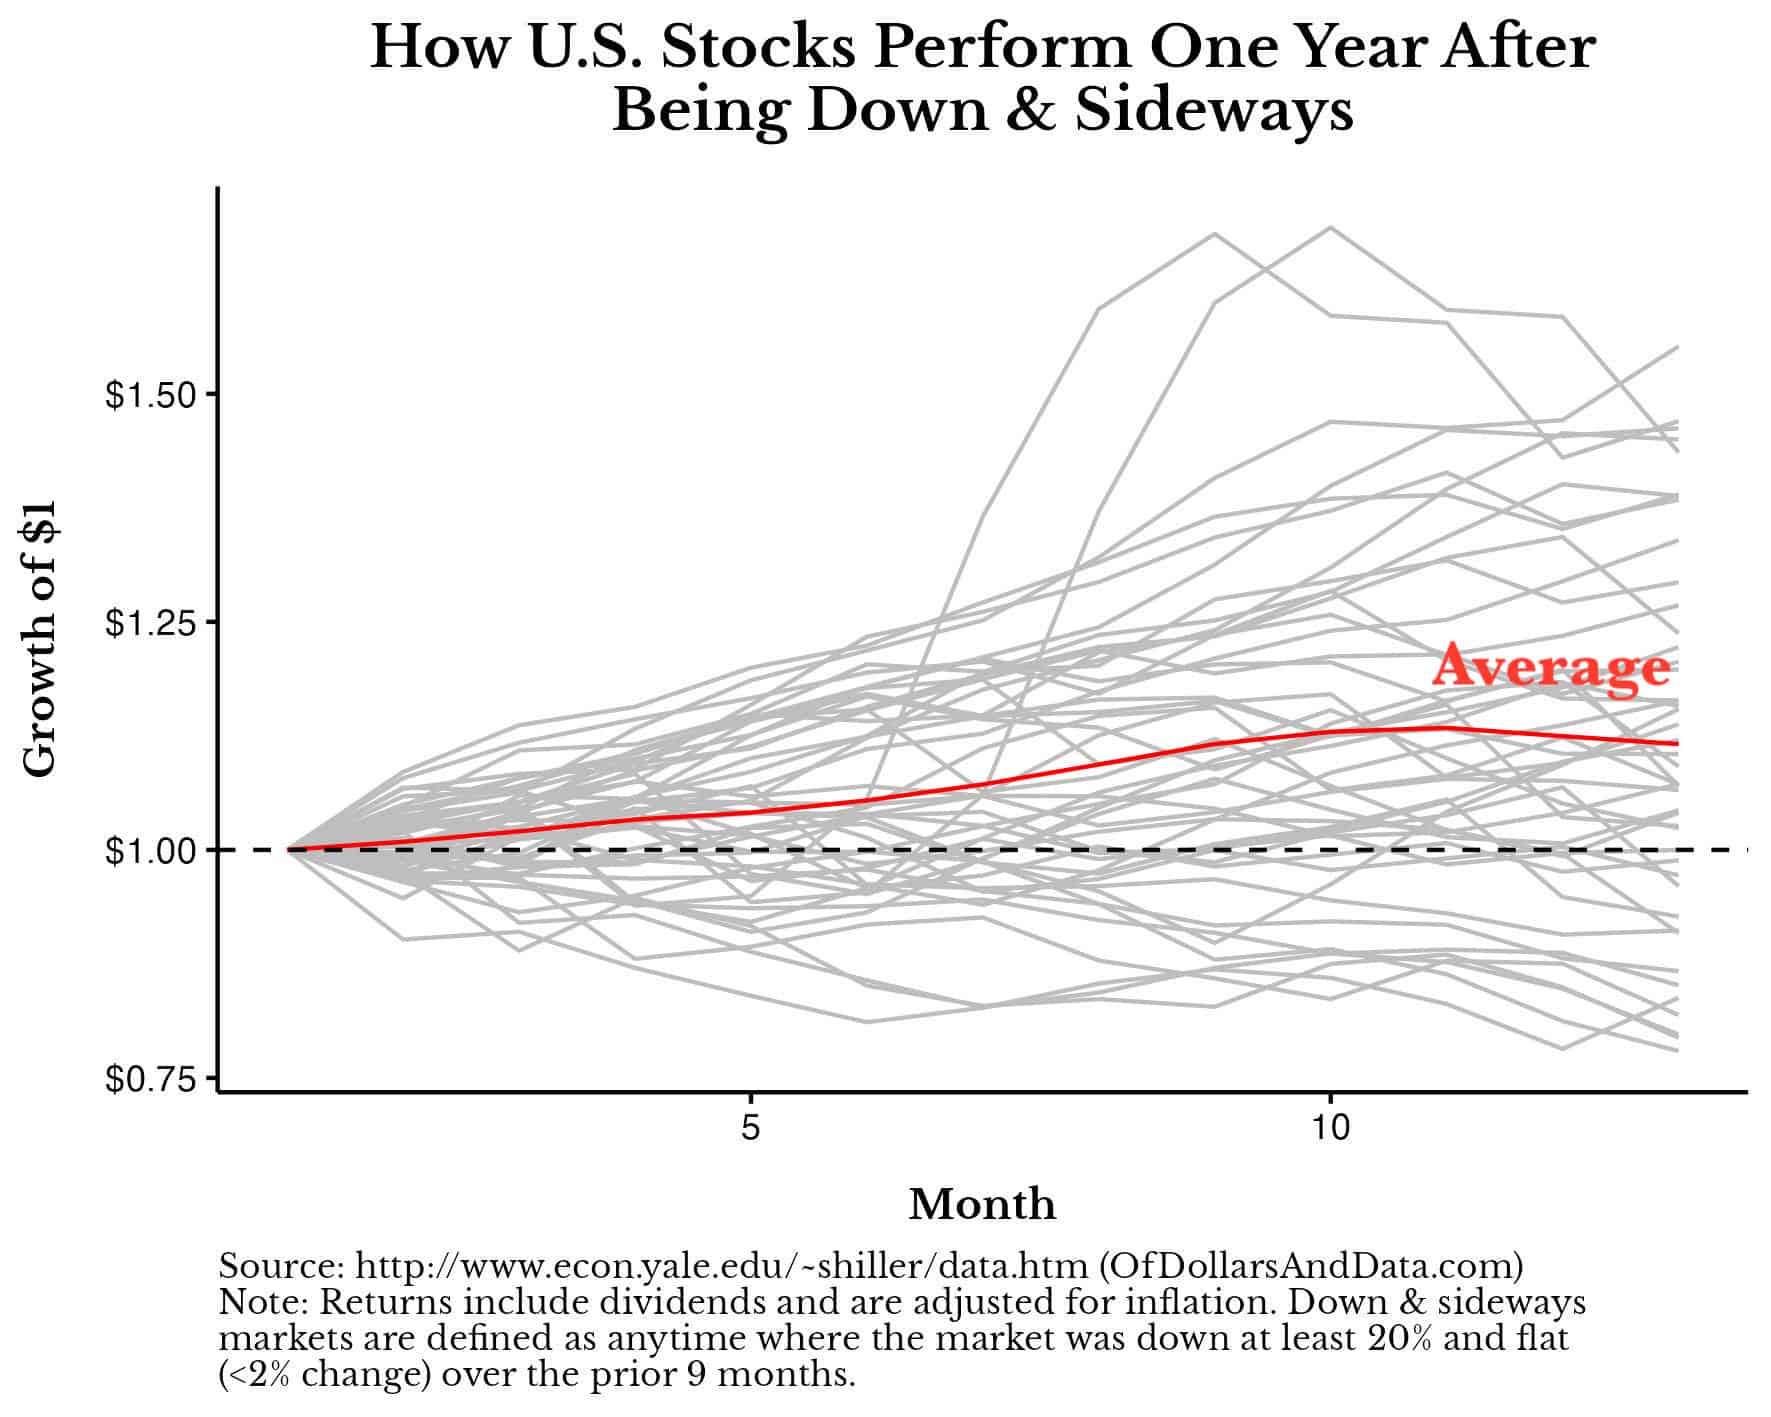 Chart showing how U.S. stocks perform 1-year after being down & sideways.